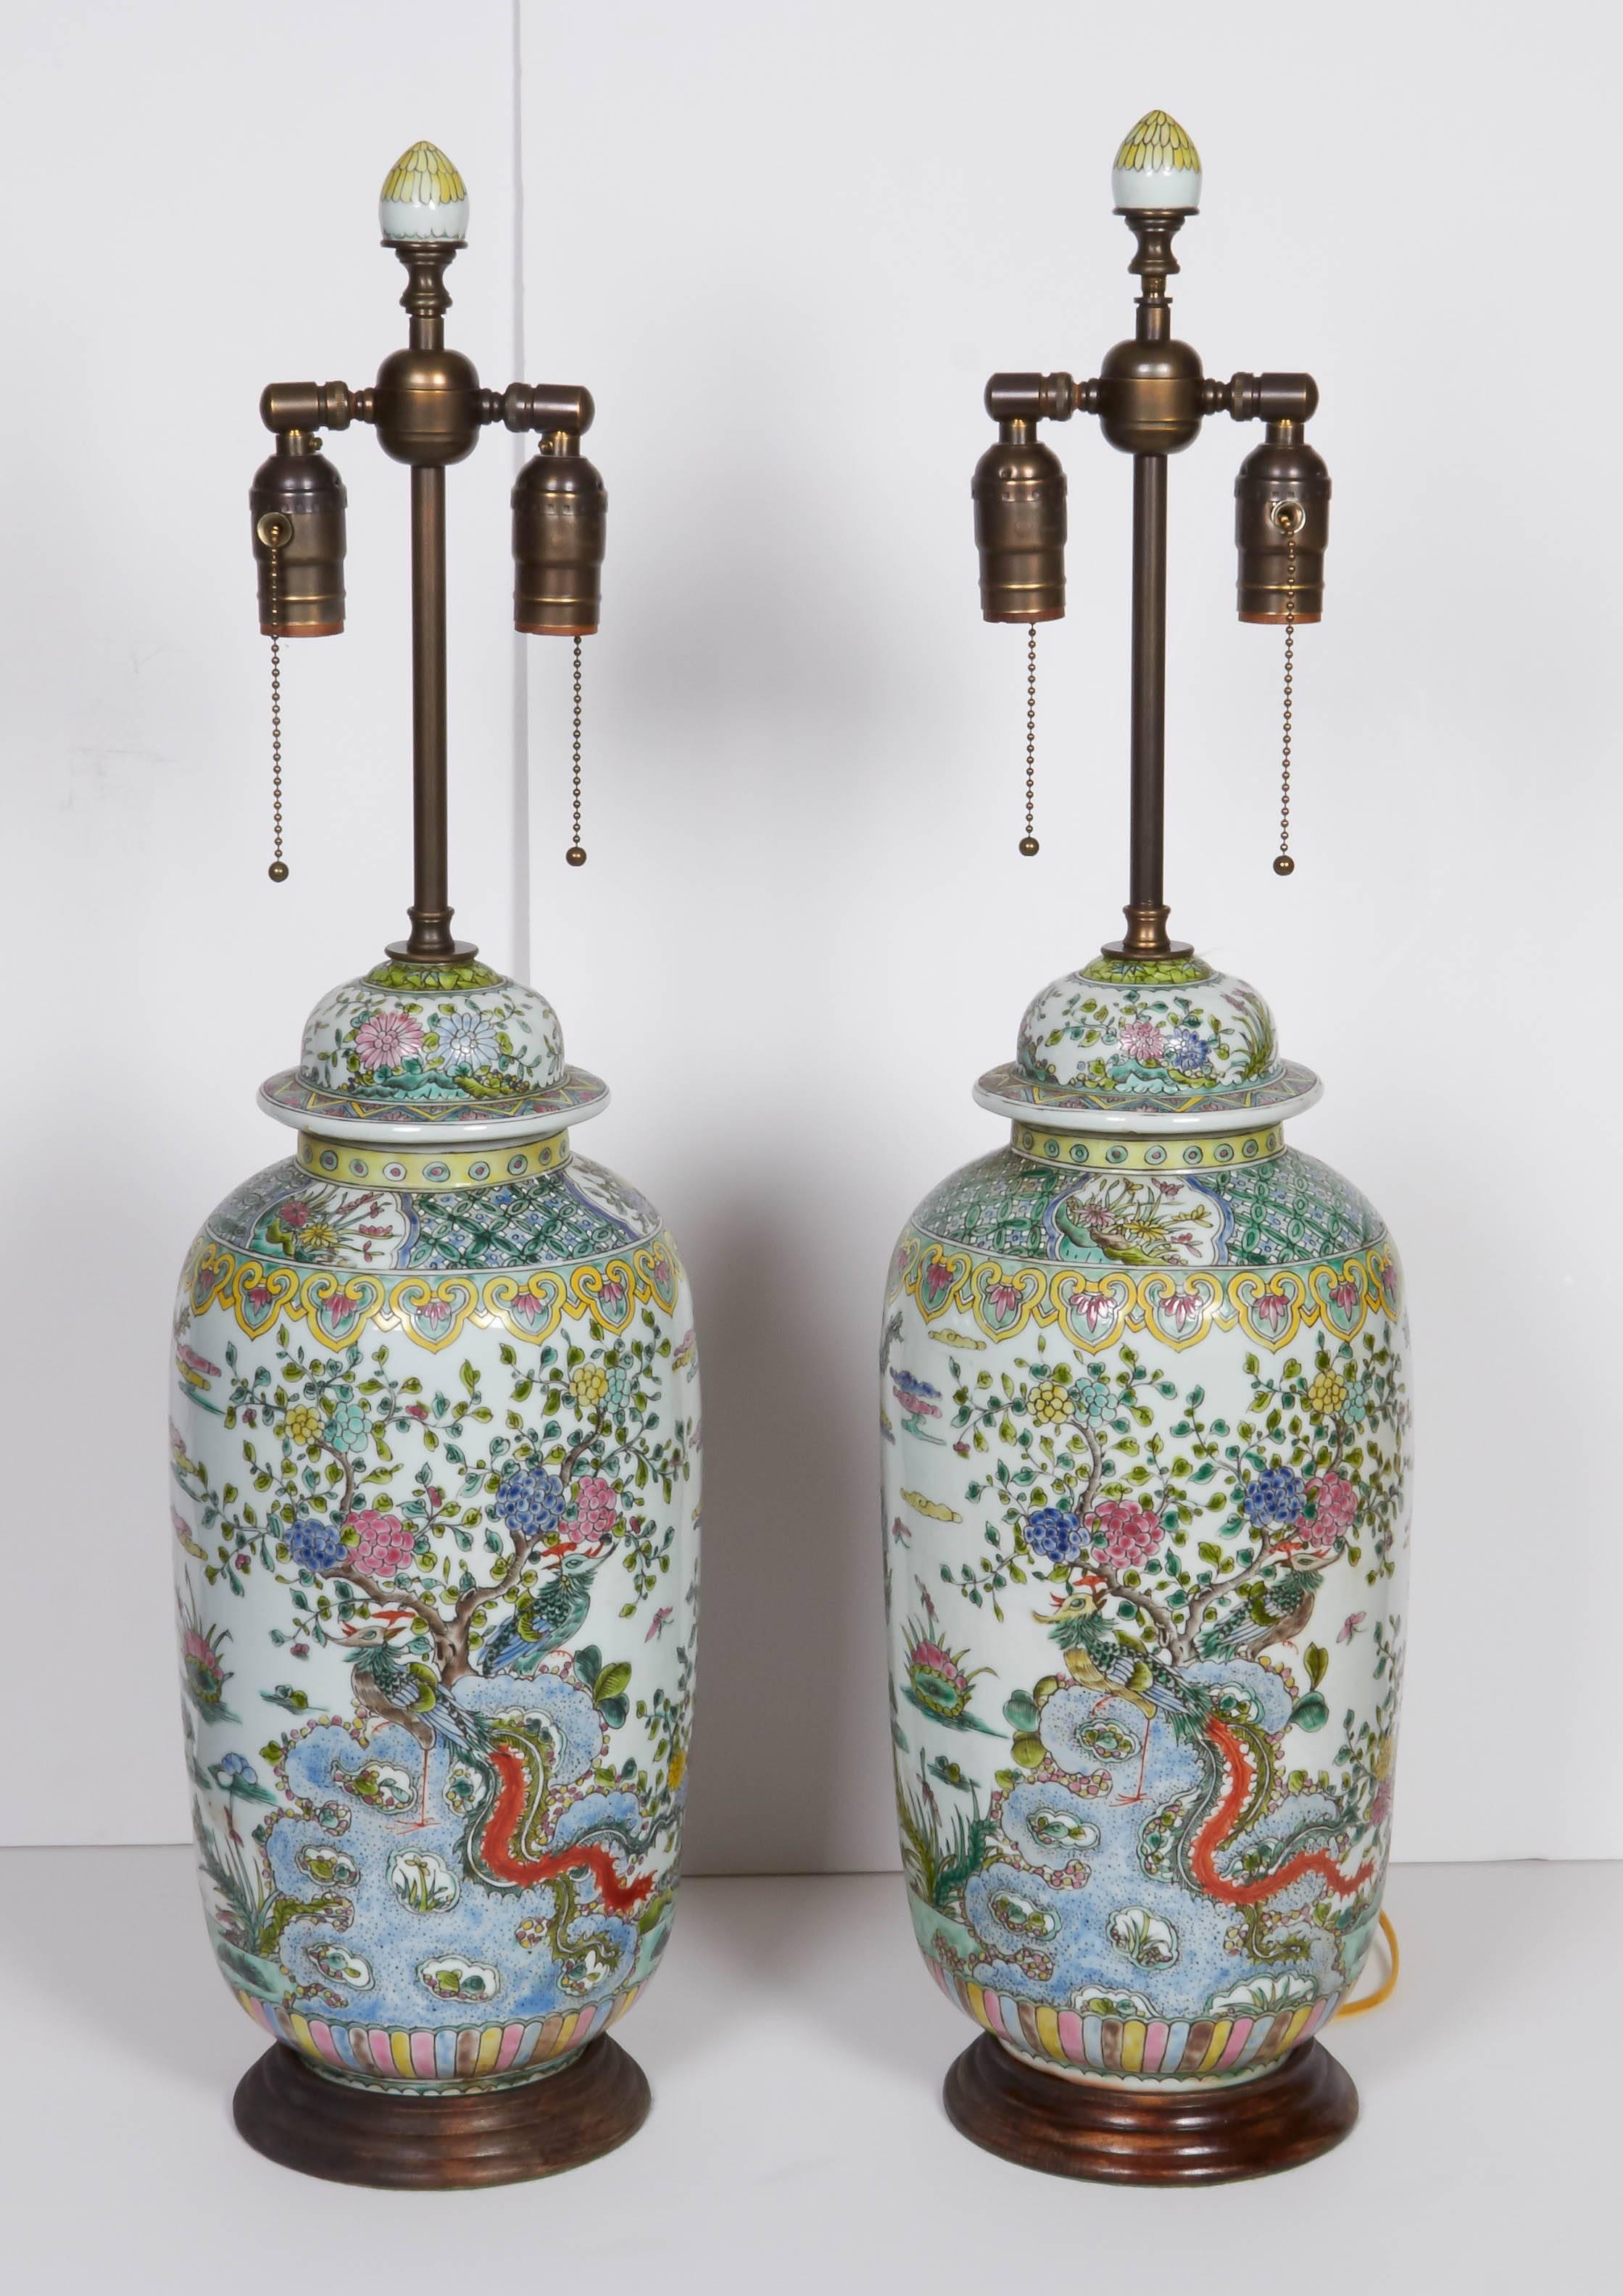 A pair of Chinese porcelain urns fitted as lamps, peacock and floral motif throughout, resting on a wooden base, double cluster socket, wired for electricity
Overall Height- 21.5
Height of urn: 18.5